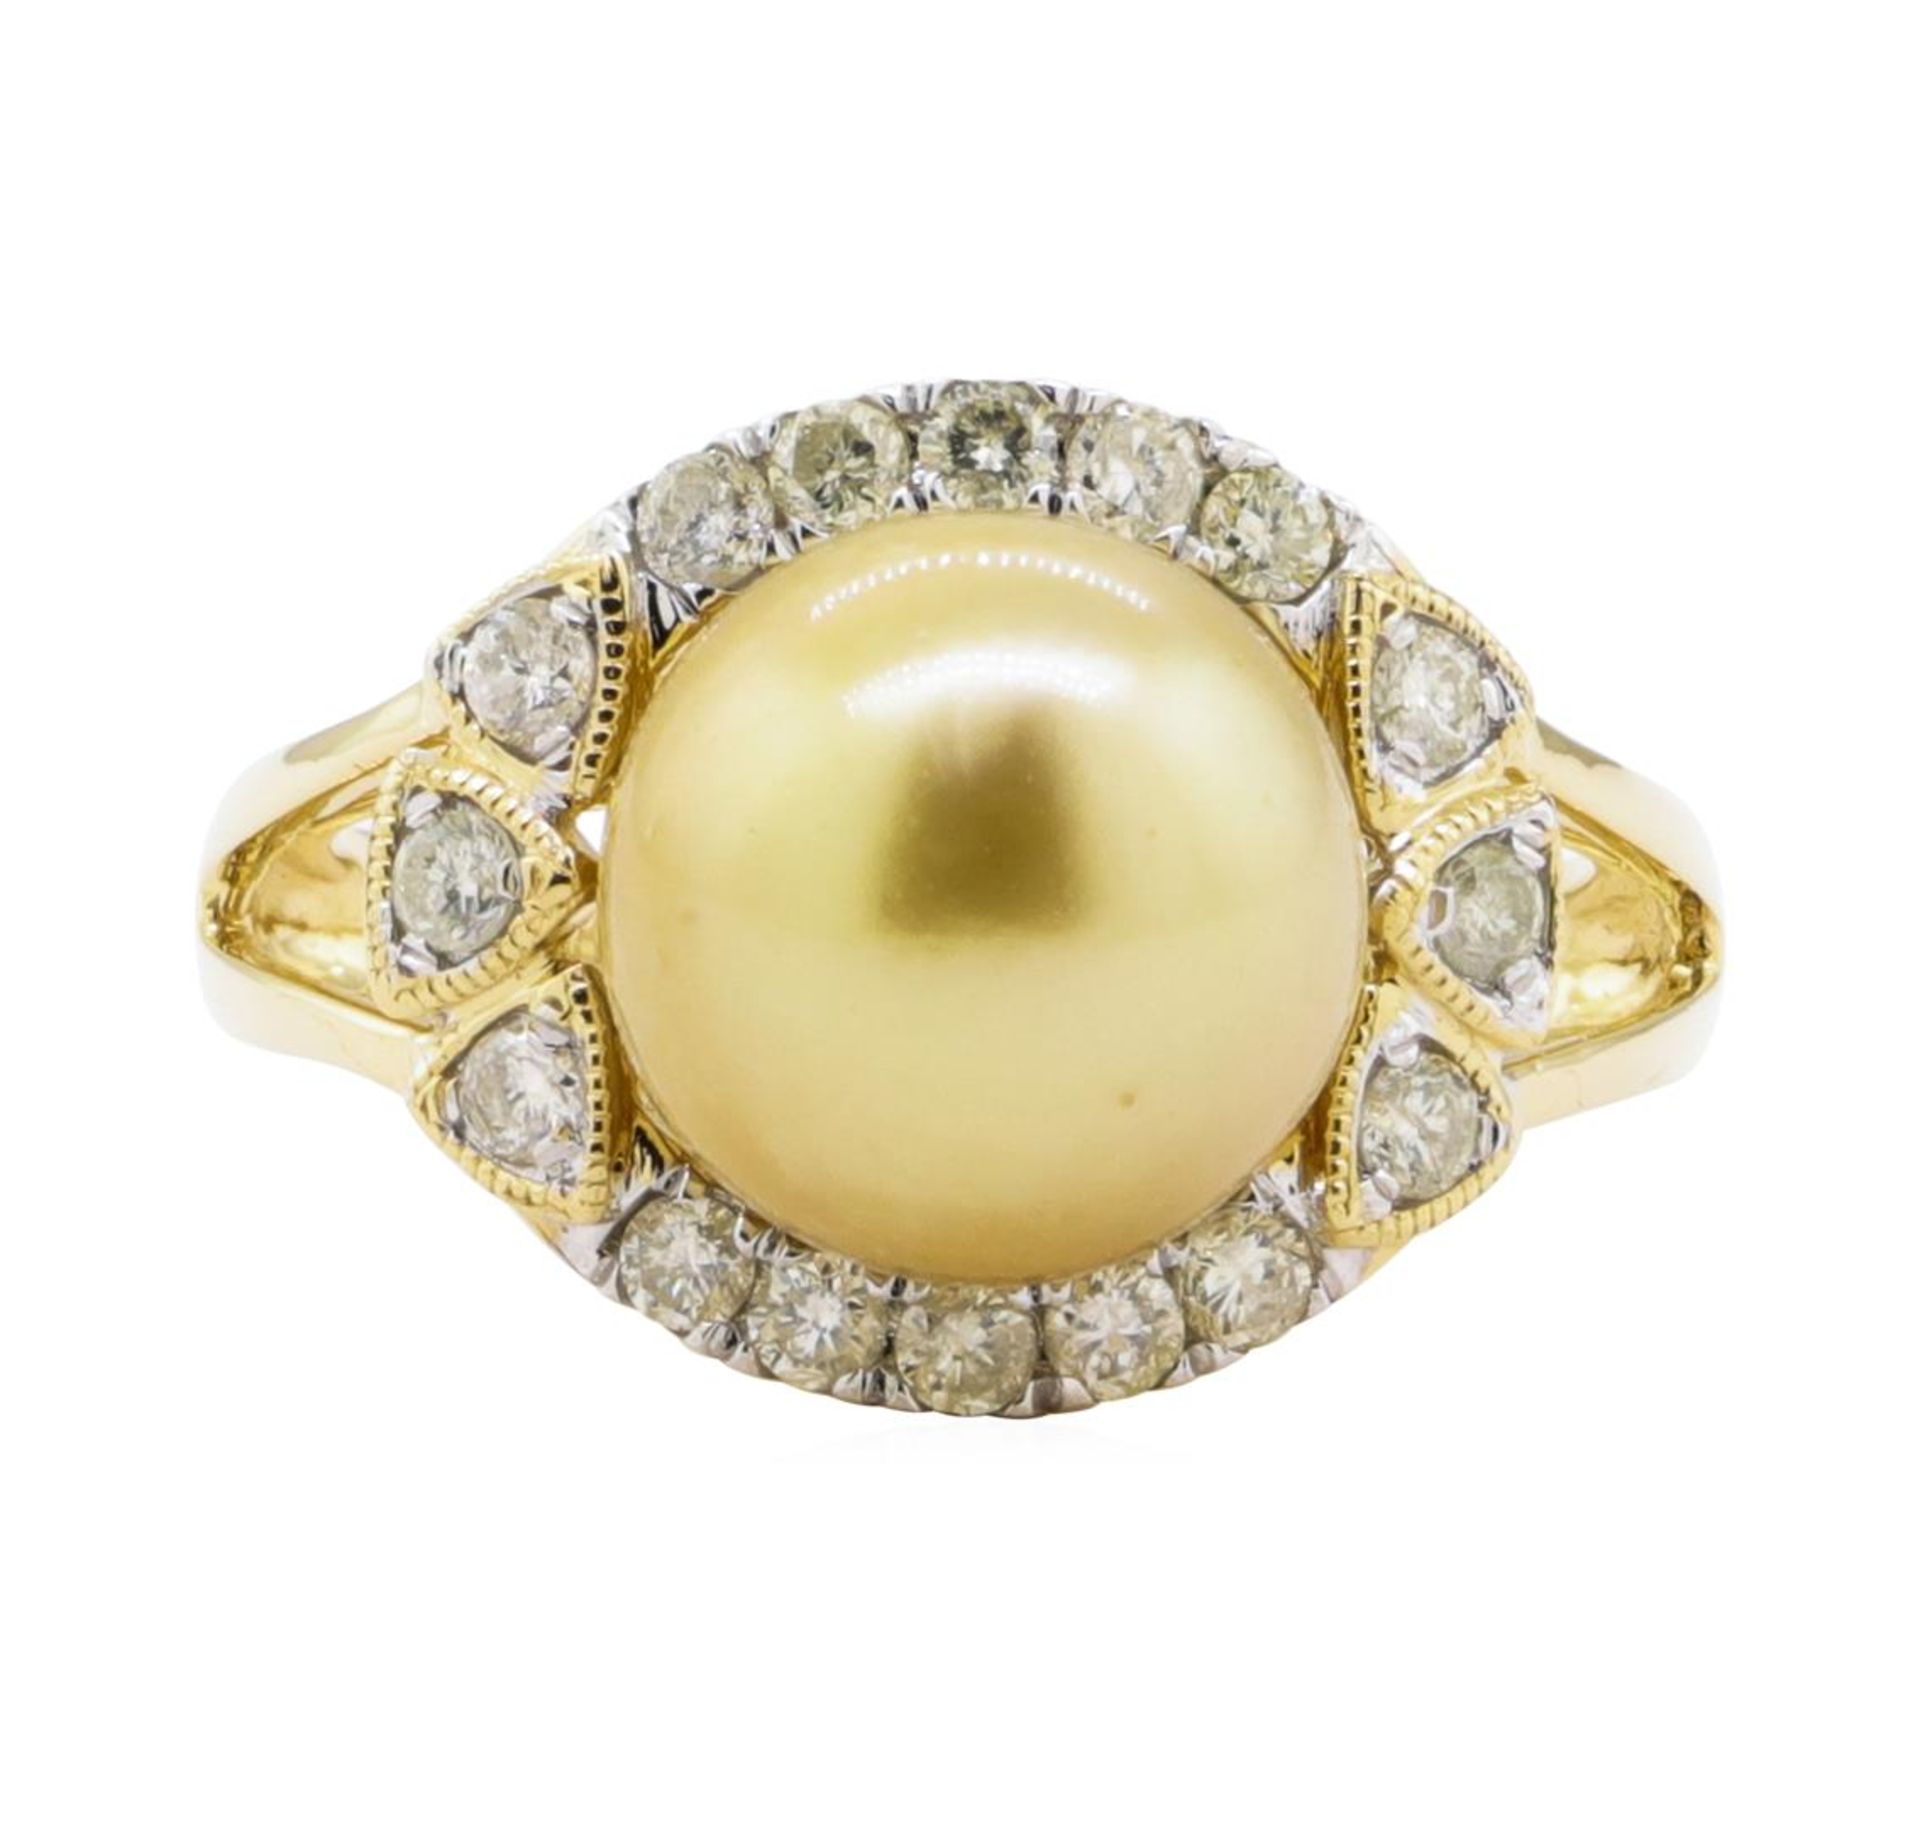 Pearl and Diamond Ring - 18KT Yellow Gold - Image 2 of 5